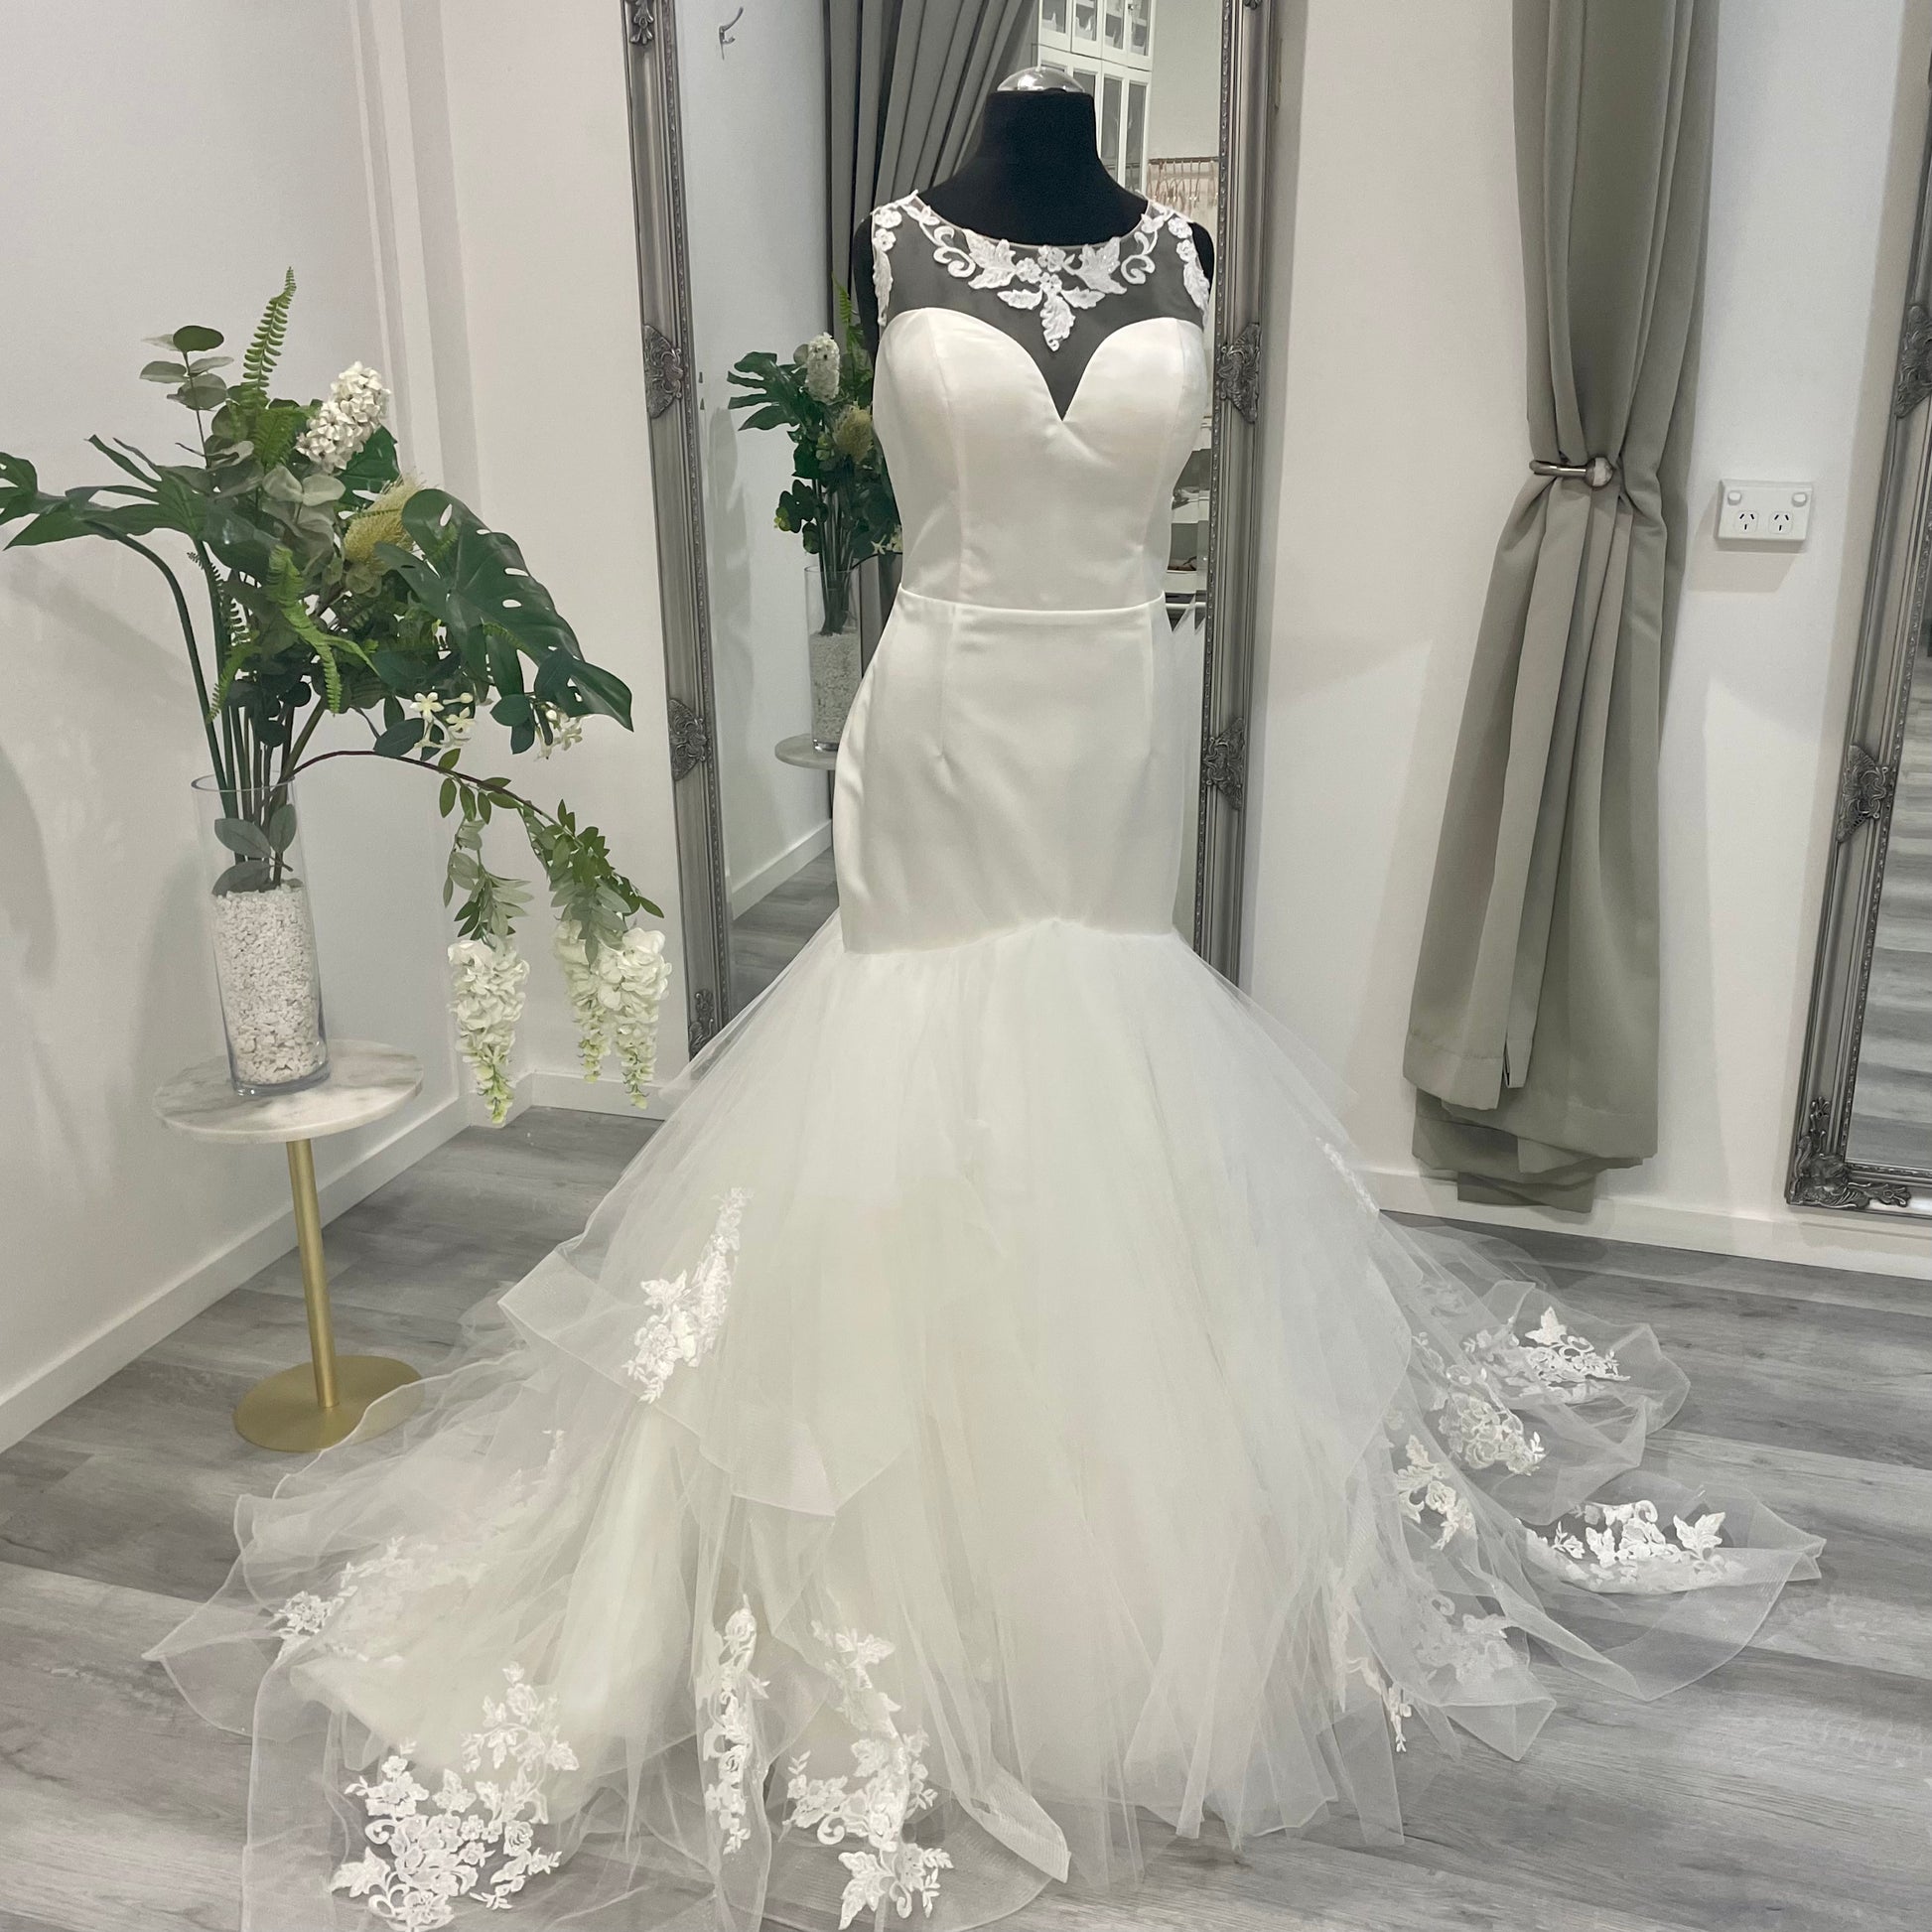 Chic Iris Trumpet bridal gown with intricate lace detailing and a flowing mermaid silhouette on display at Divine Bridal.